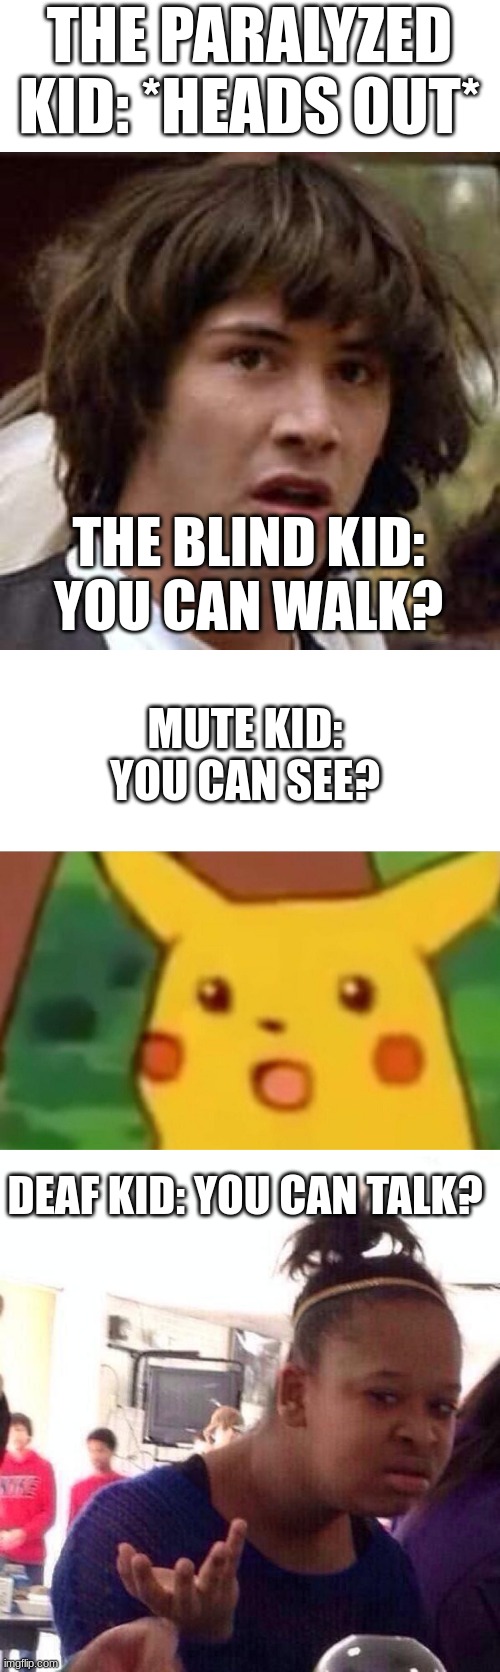 THE PARALYZED KID: *HEADS OUT*; THE BLIND KID: YOU CAN WALK? MUTE KID: YOU CAN SEE? DEAF KID: YOU CAN TALK? | image tagged in memes,conspiracy keanu,surprised pikachu,black girl wat | made w/ Imgflip meme maker